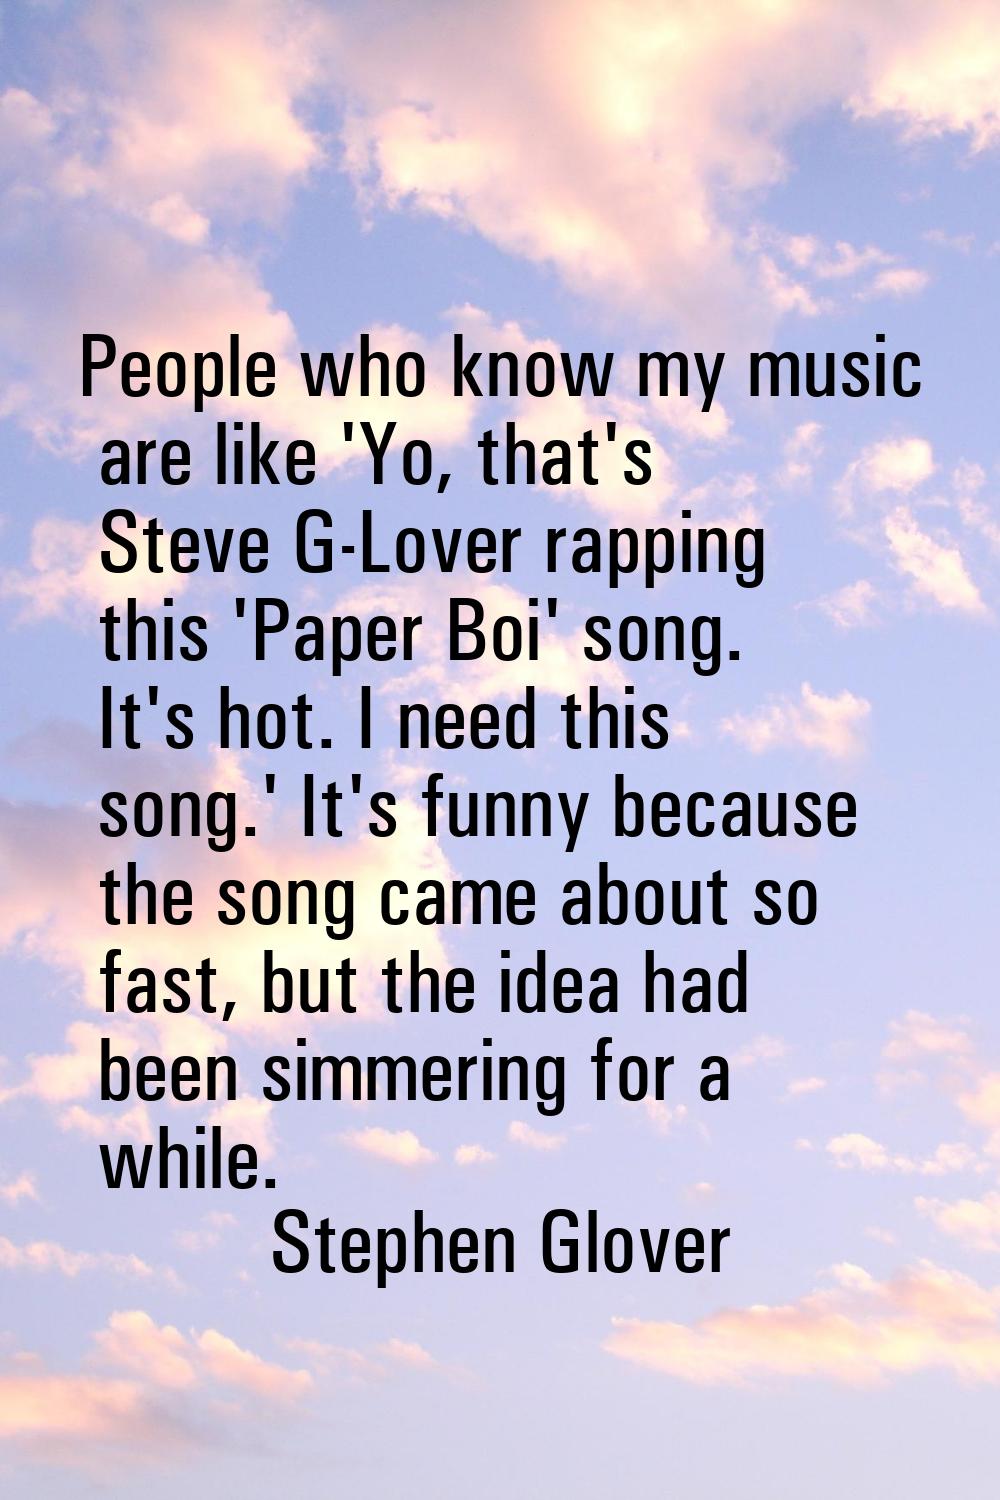 People who know my music are like 'Yo, that's Steve G-Lover rapping this 'Paper Boi' song. It's hot